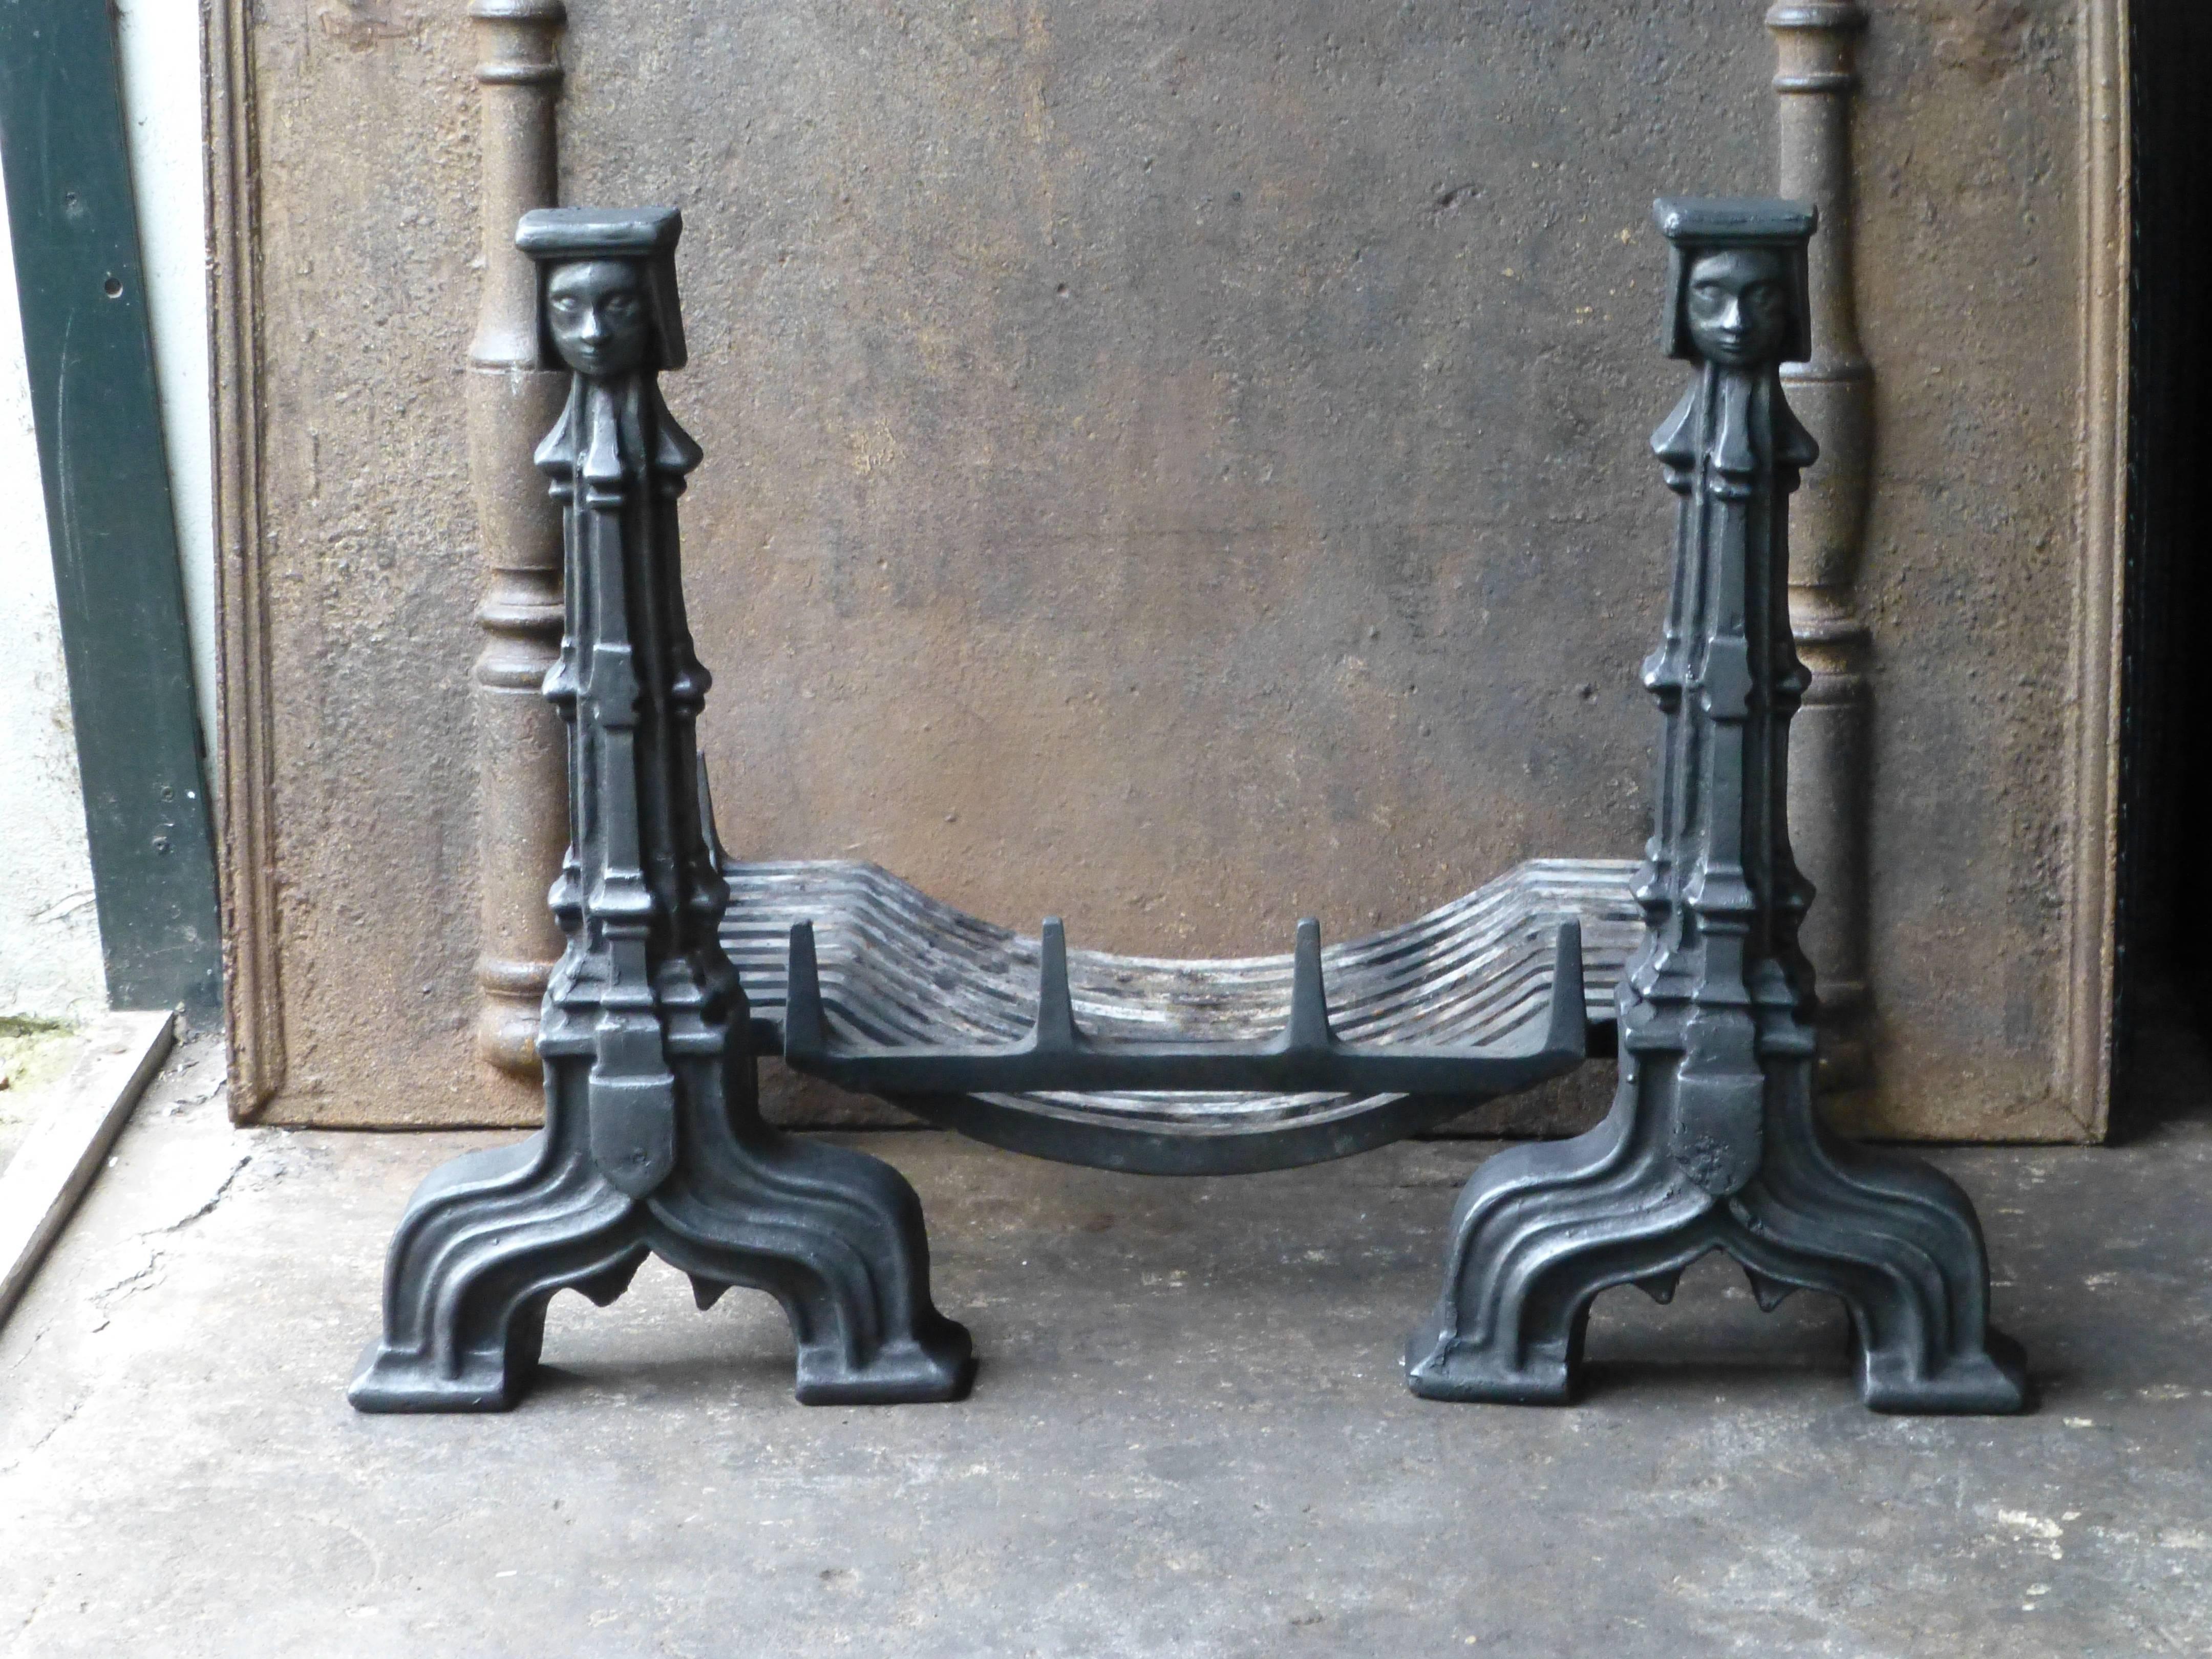 French Gothic style fireplace basket, fire grate.

The total width of the fireplace grate at the front side is 89 cm (35.0 in.).